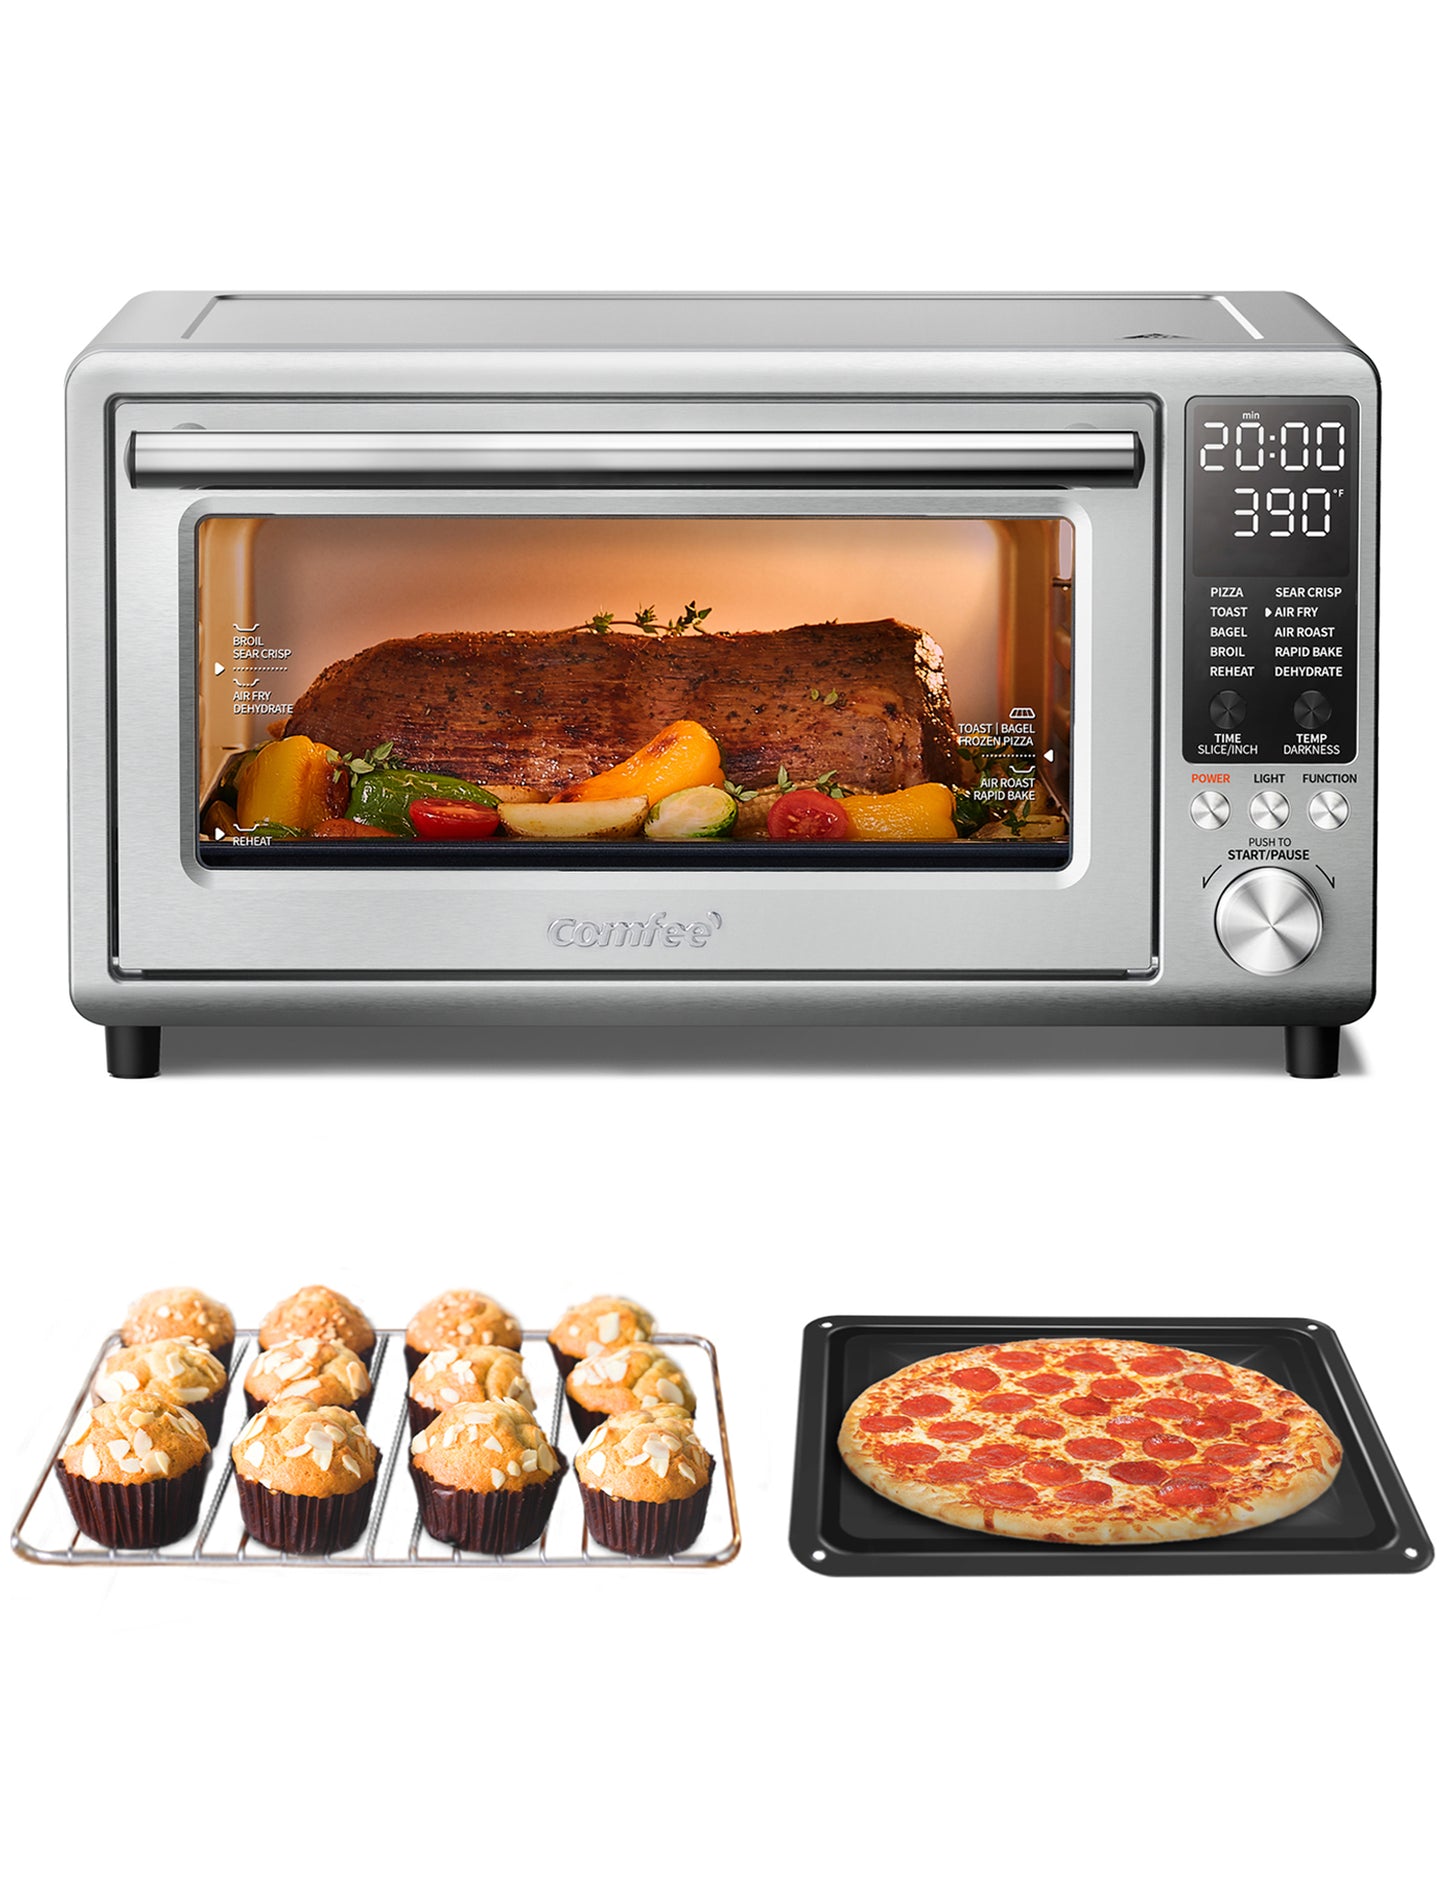 Air Fryer Toaster Oven Combo with two type of foods